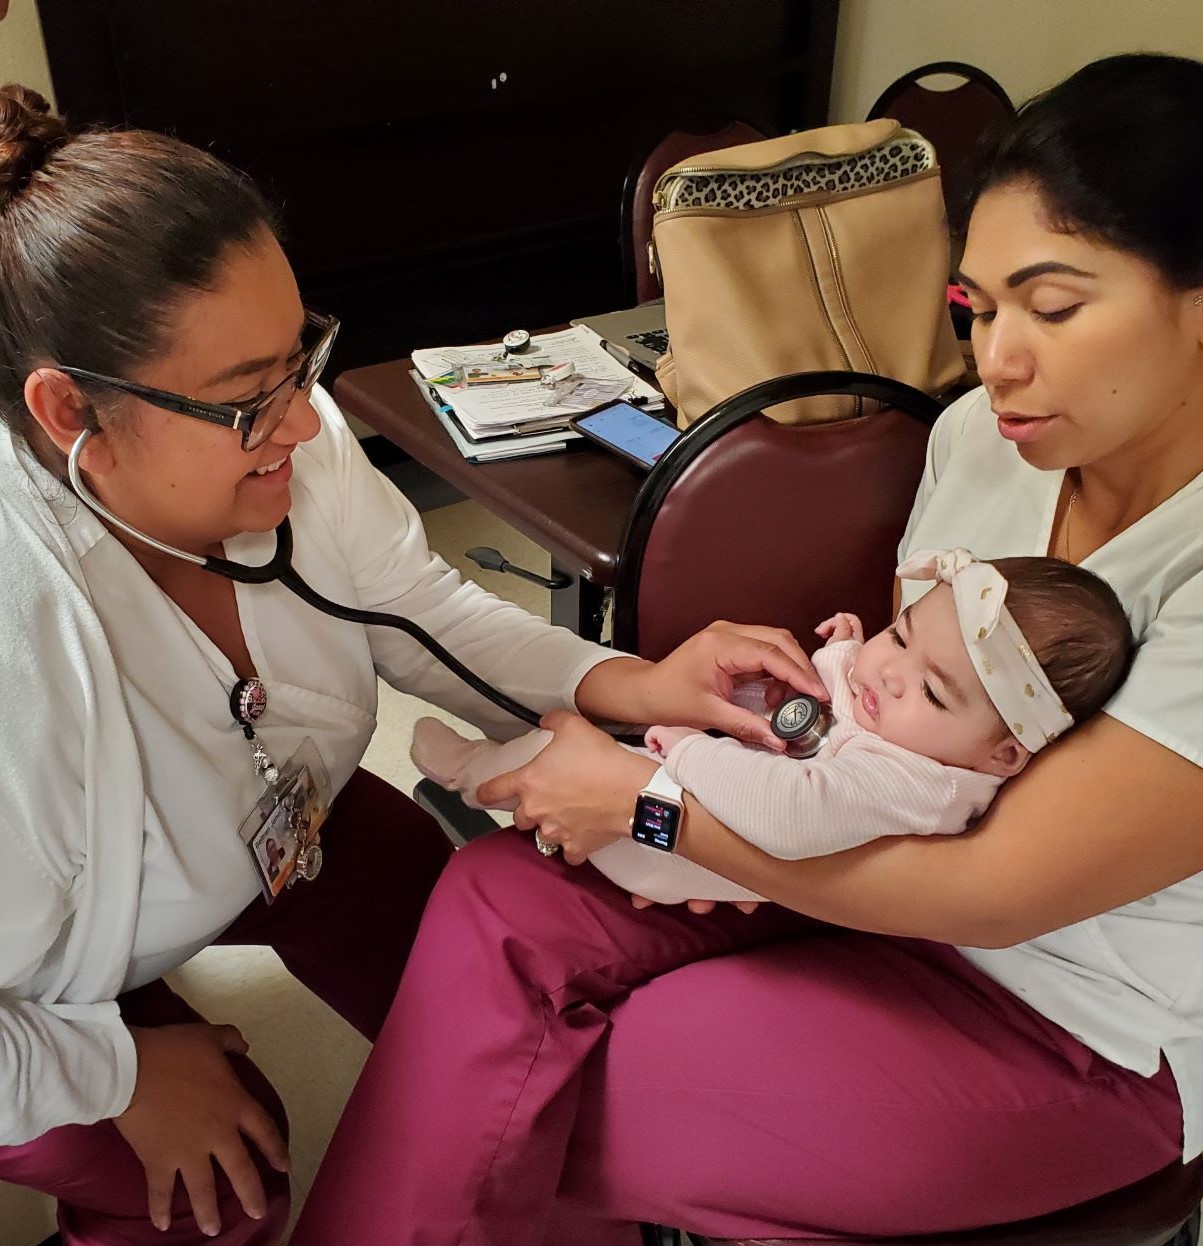 Vocational Nursing students use a stethoscope on an infant